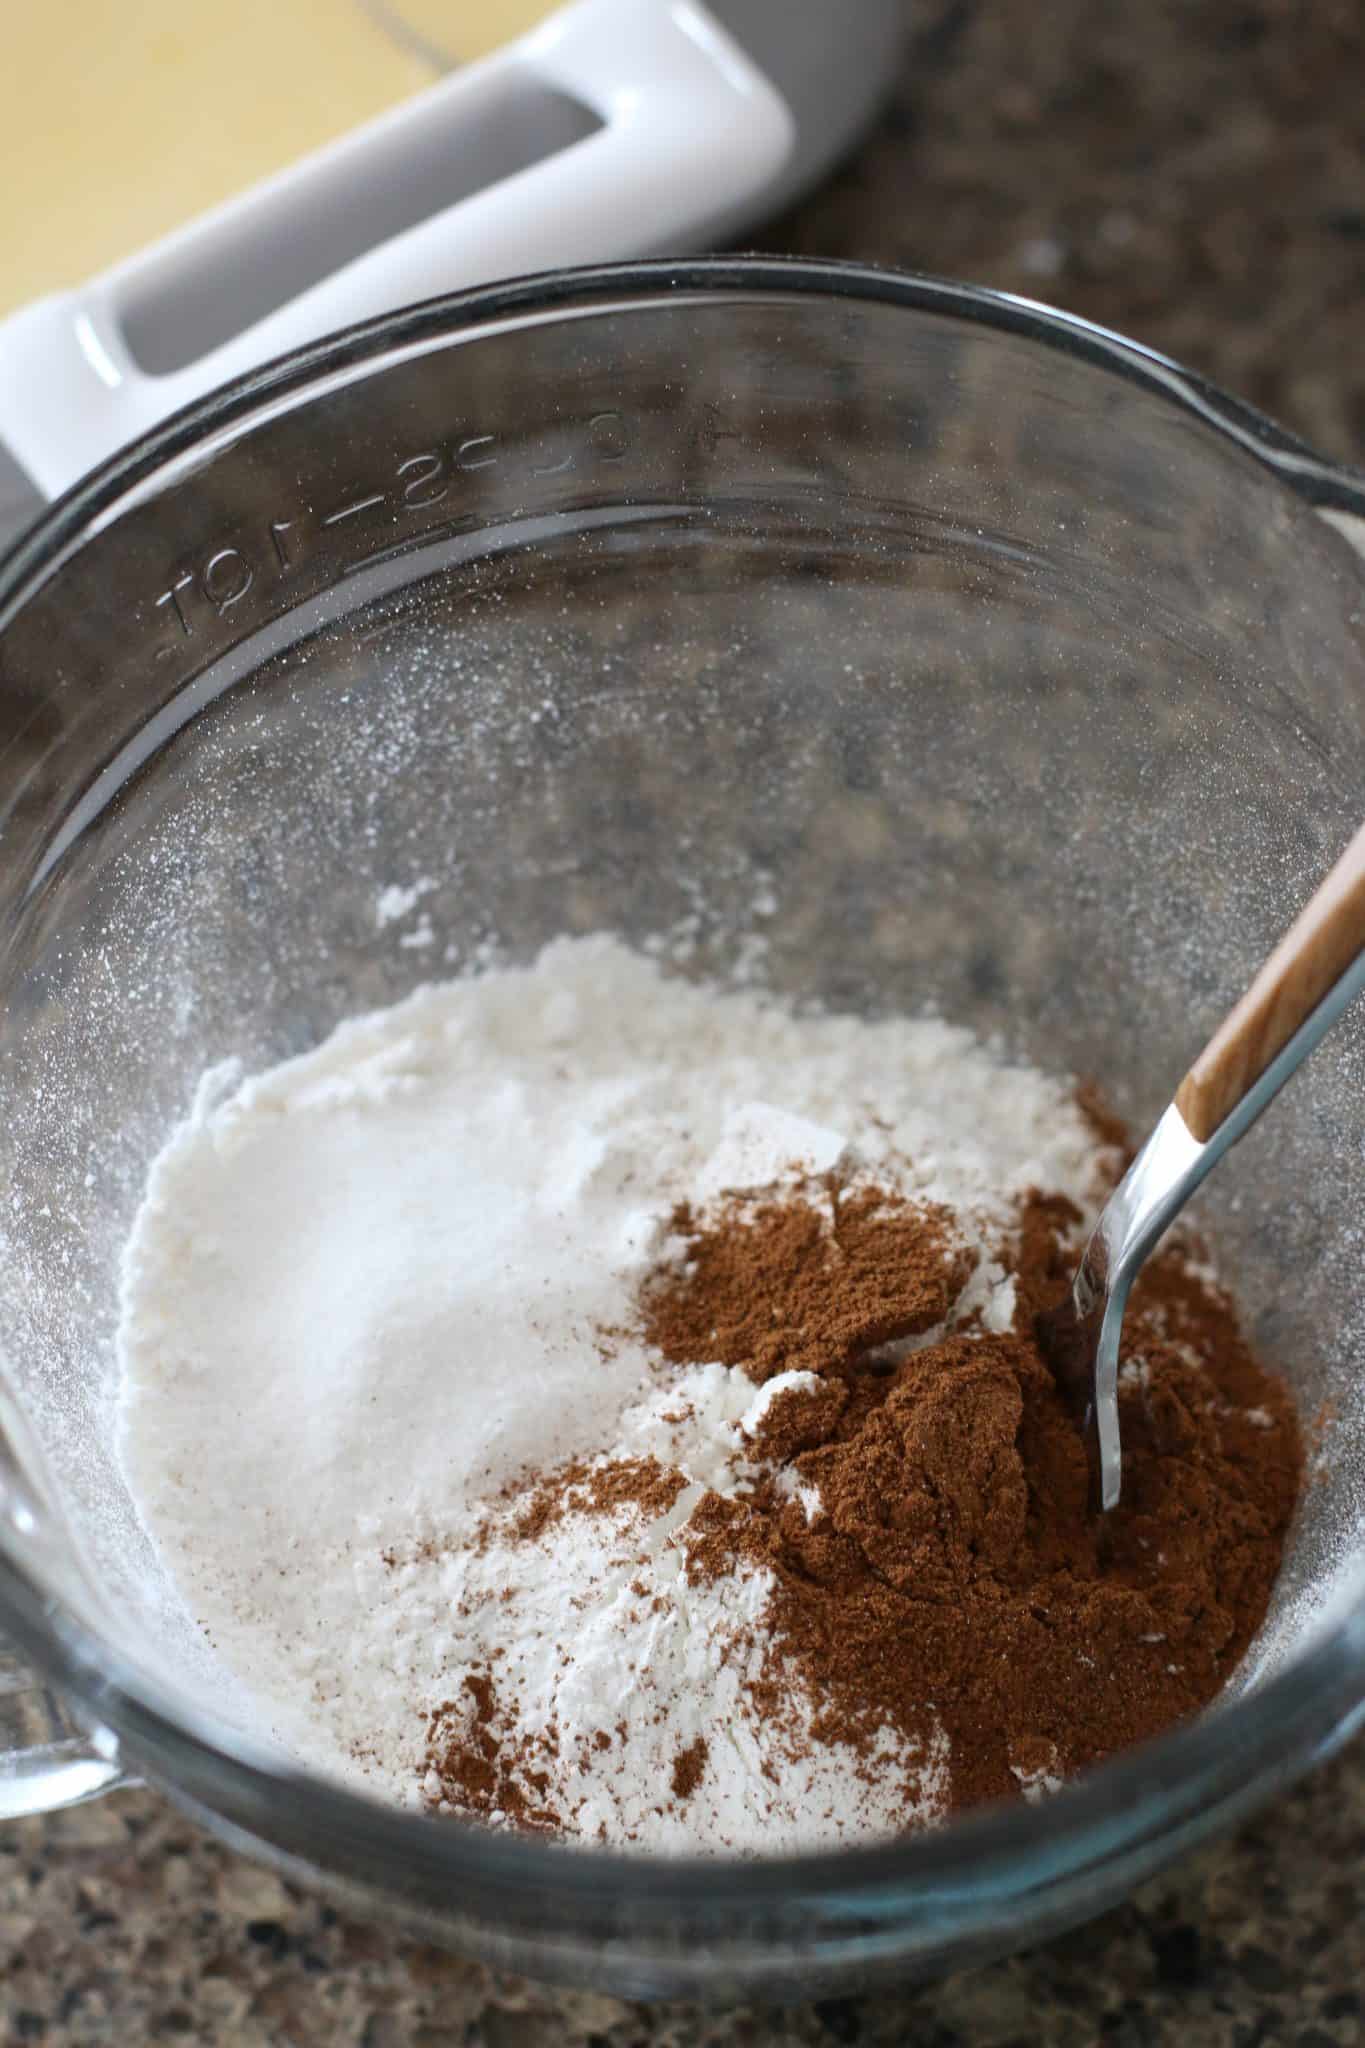 flour, cinnamon, baking powder being mixed together with a fork in a clear measuring cup.